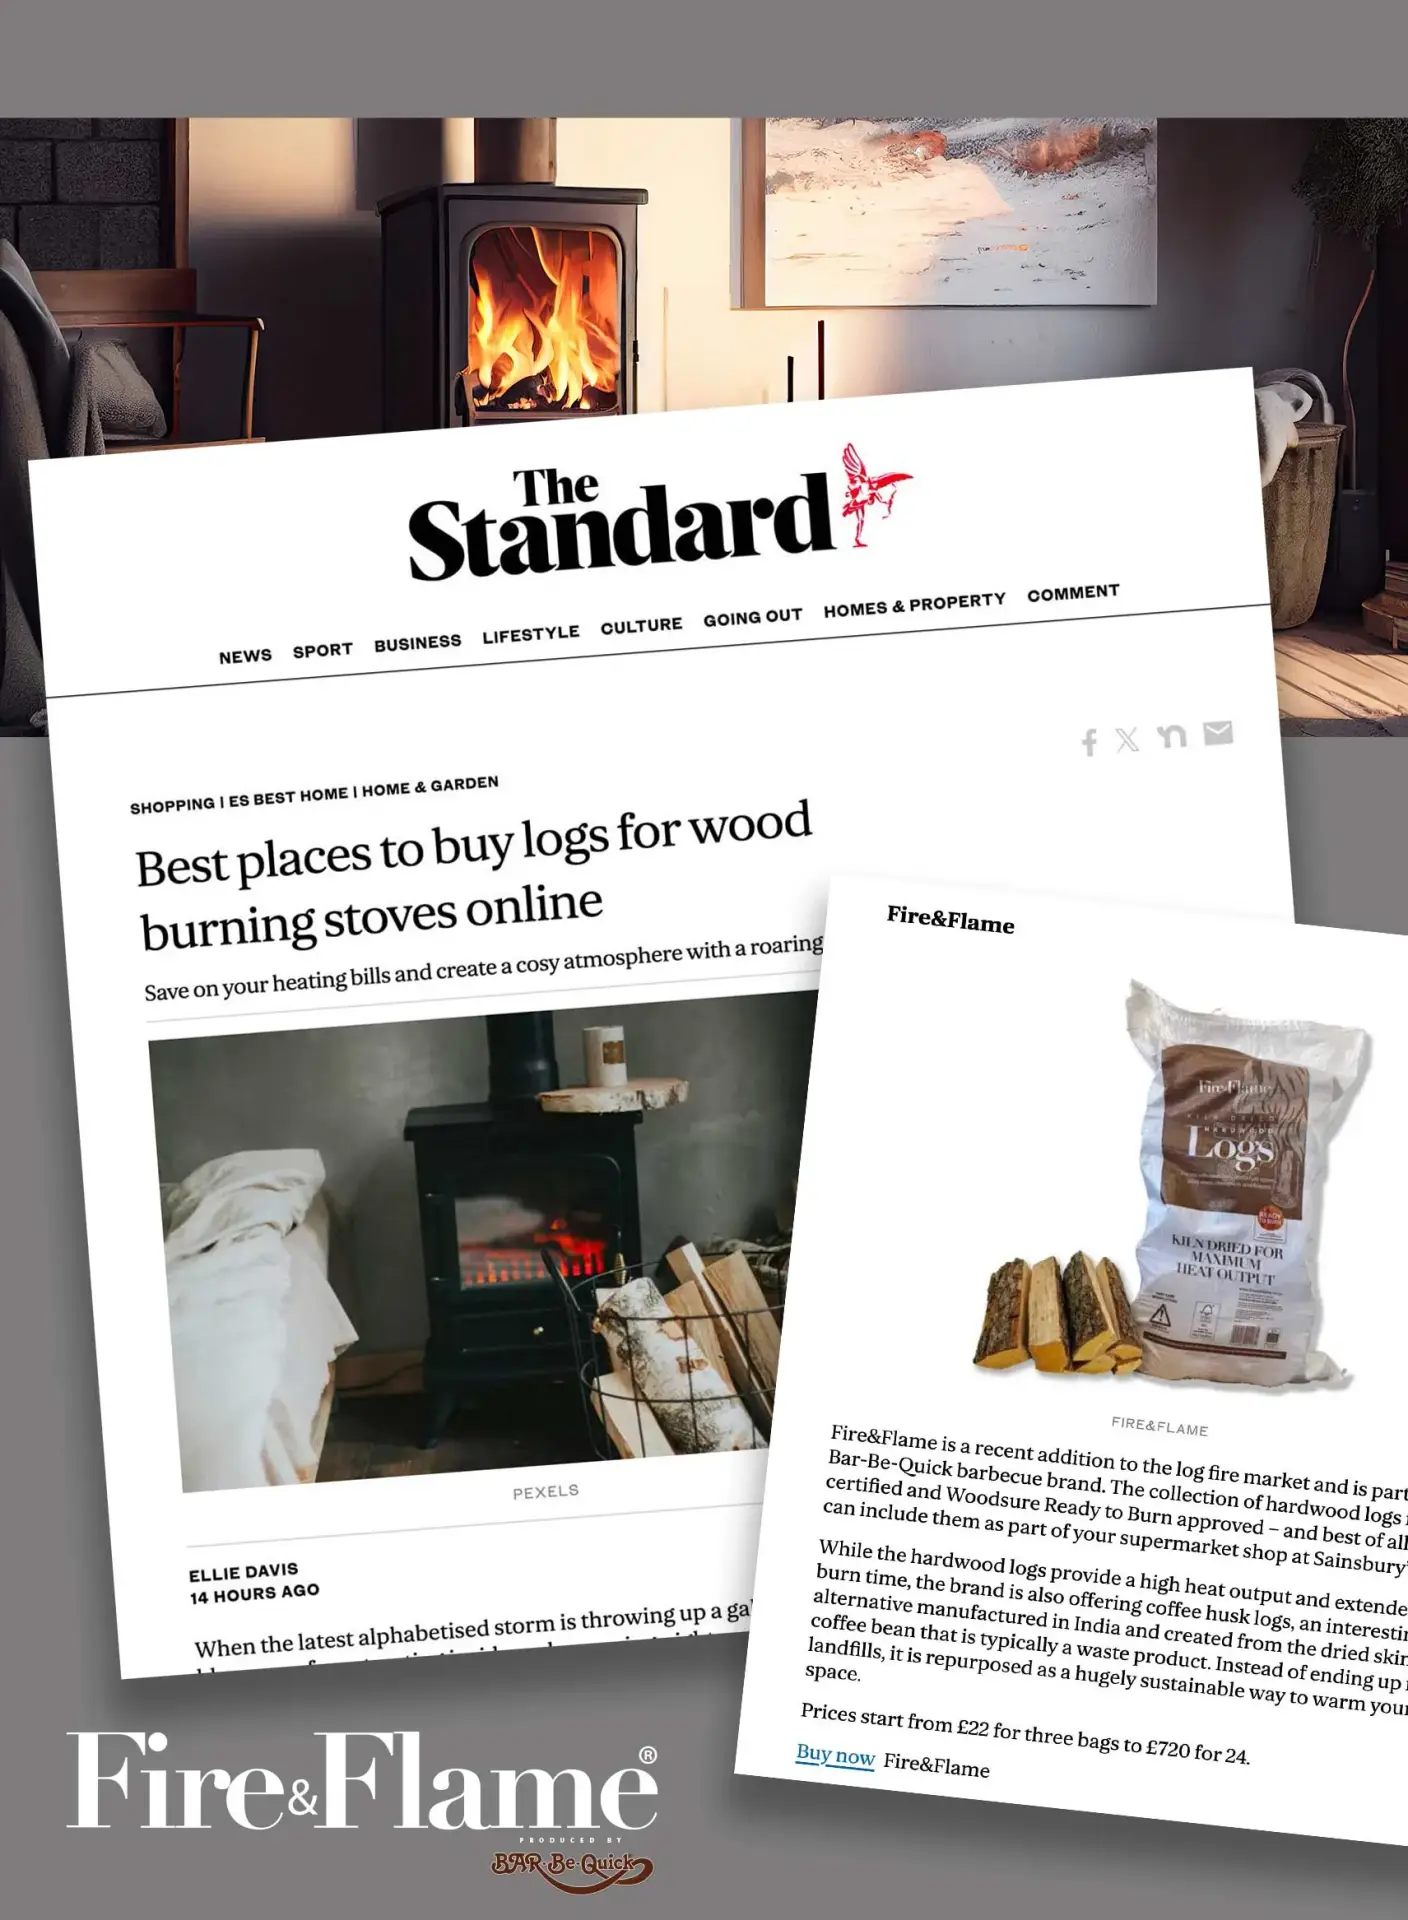 Article on best wood-burning stoves and logs online.